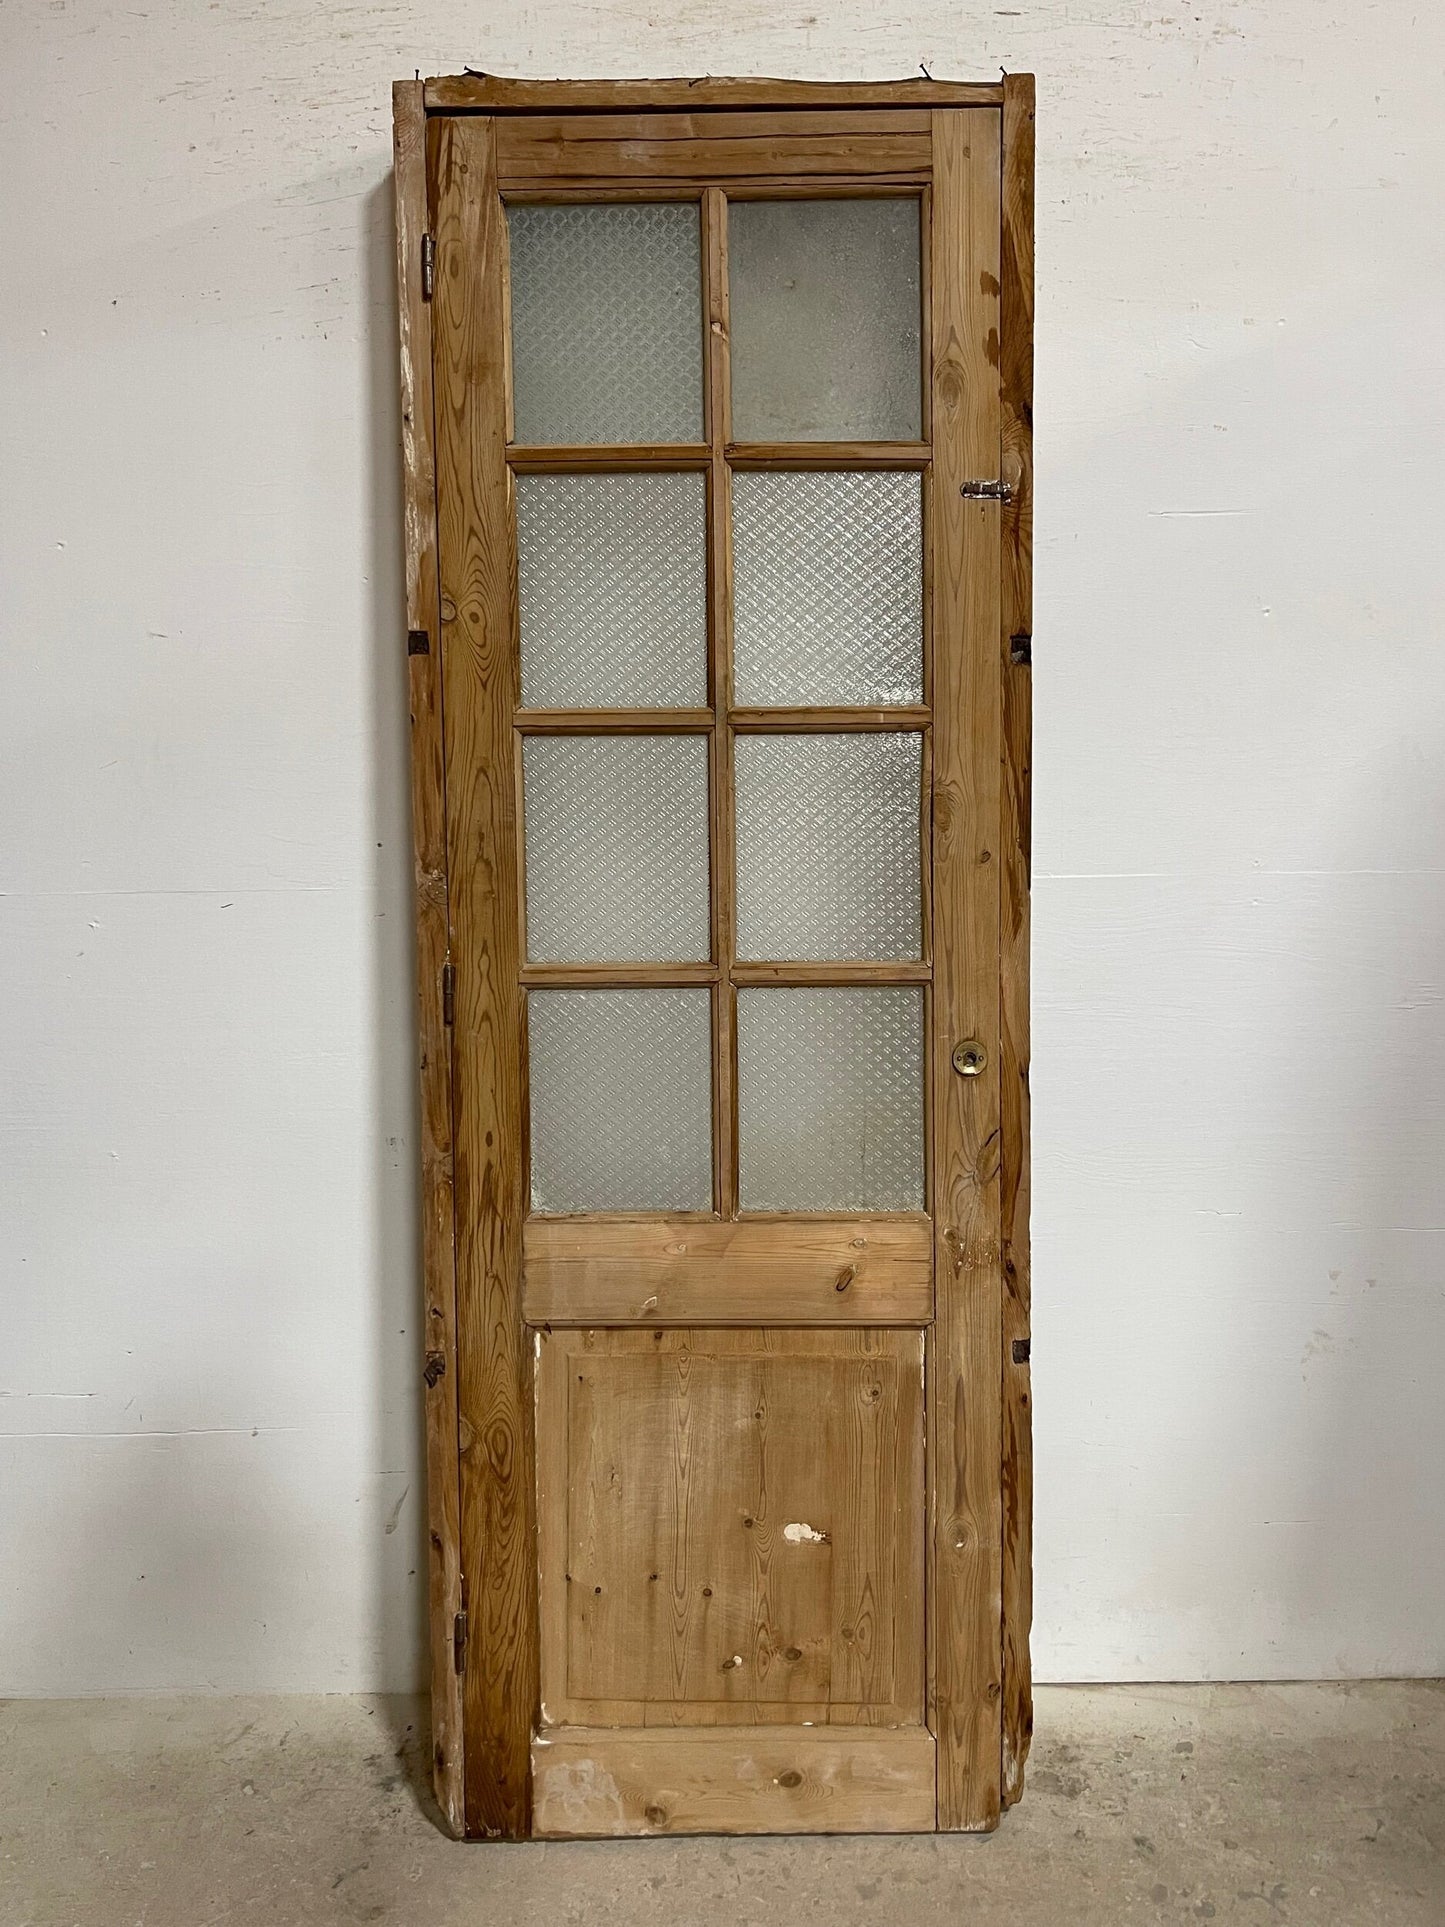 Antique French panel door with glass (F 86.5x30.5) (D 84.75x27.25) I231